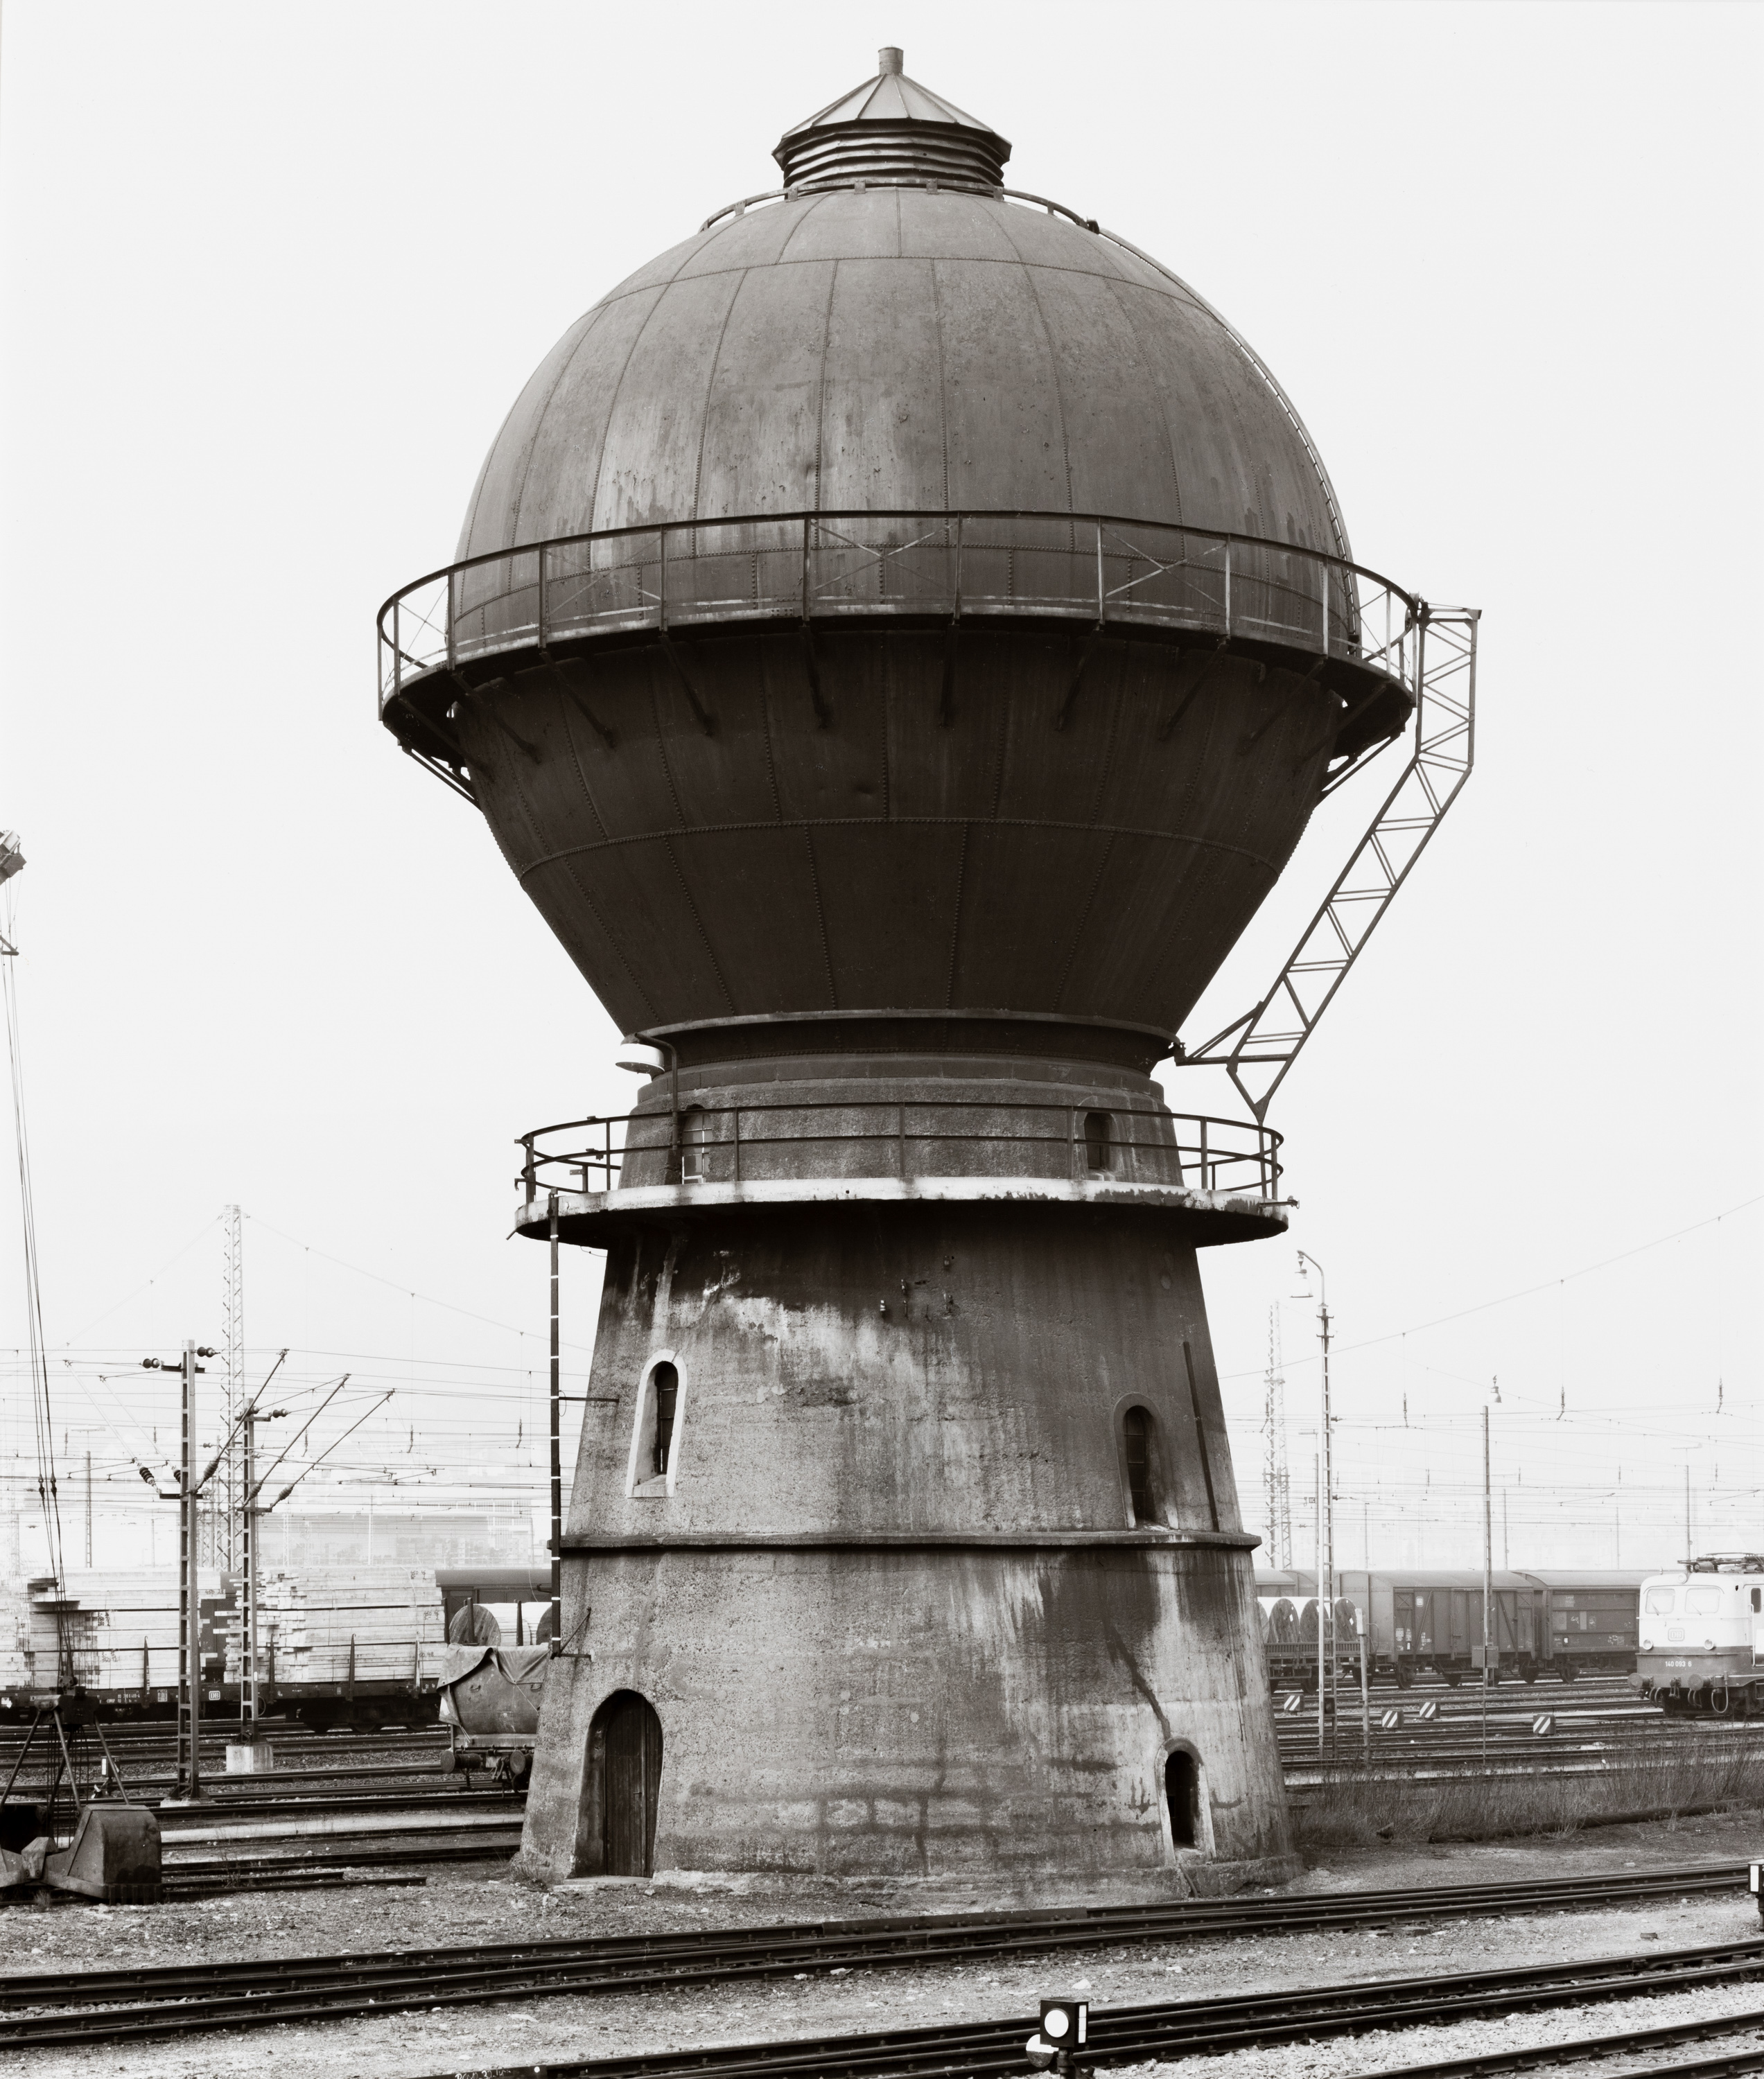 Black and white photograph of a water tower amongst railroad tracks